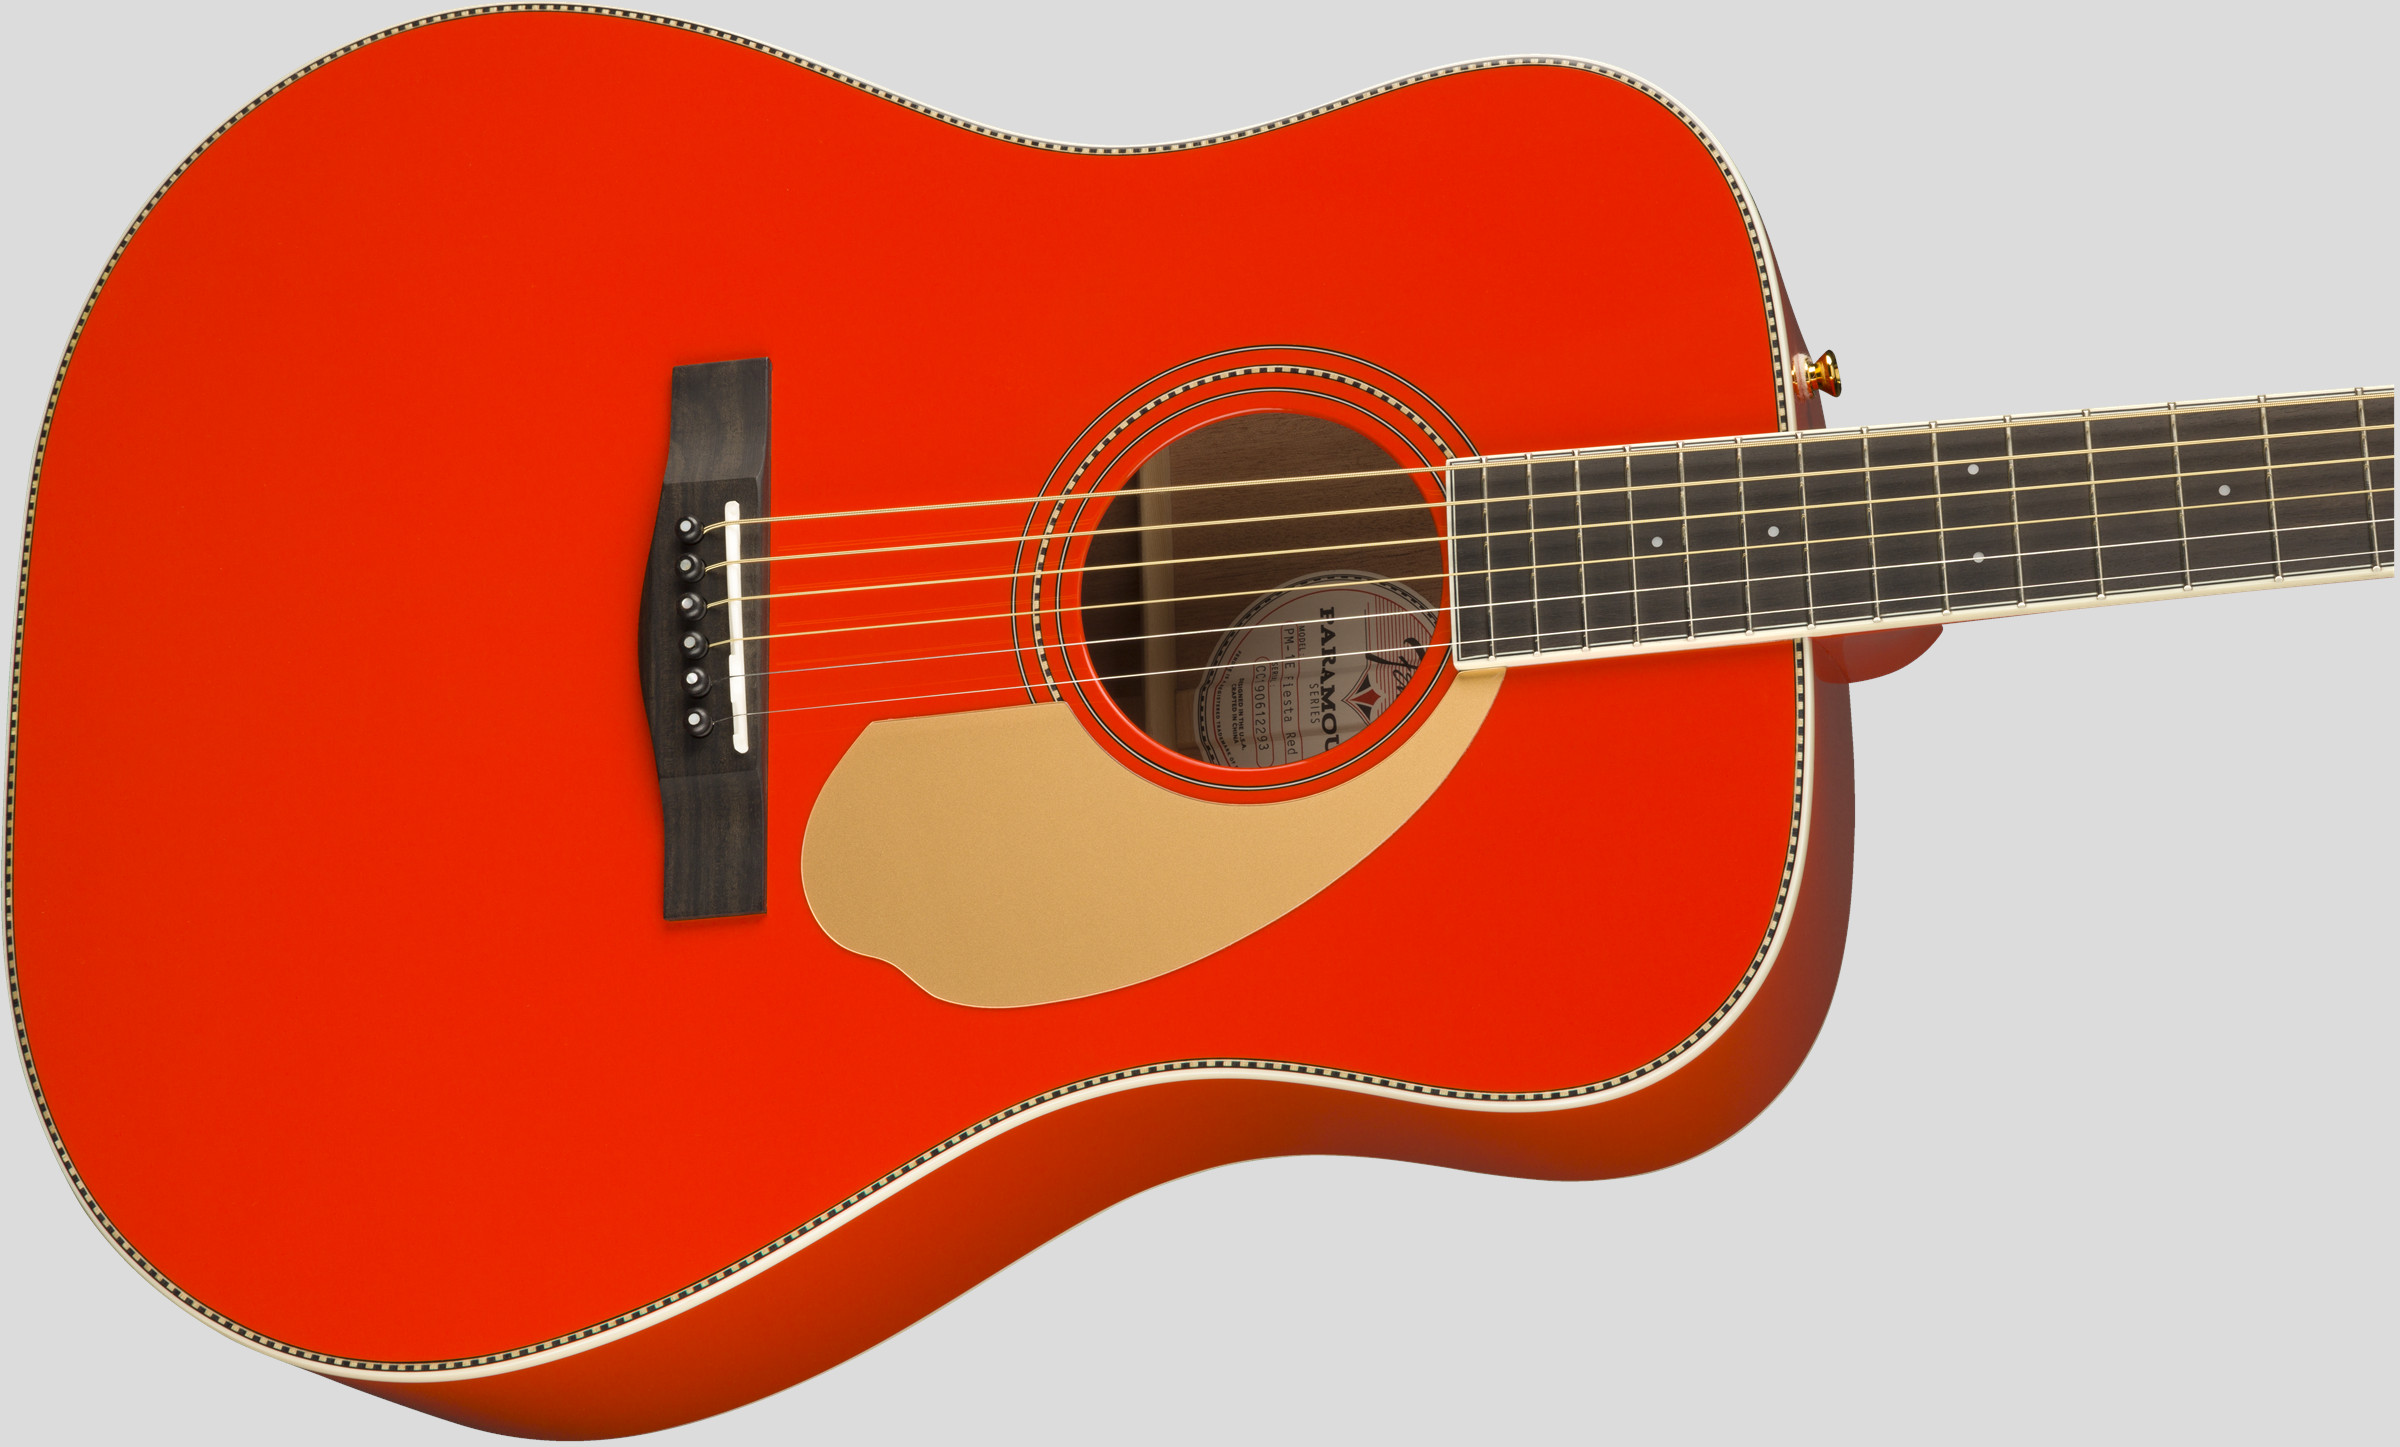 Fender Limited Edition PM-1 Deluxe Fiesta Red with Ebony Fingerboard 3